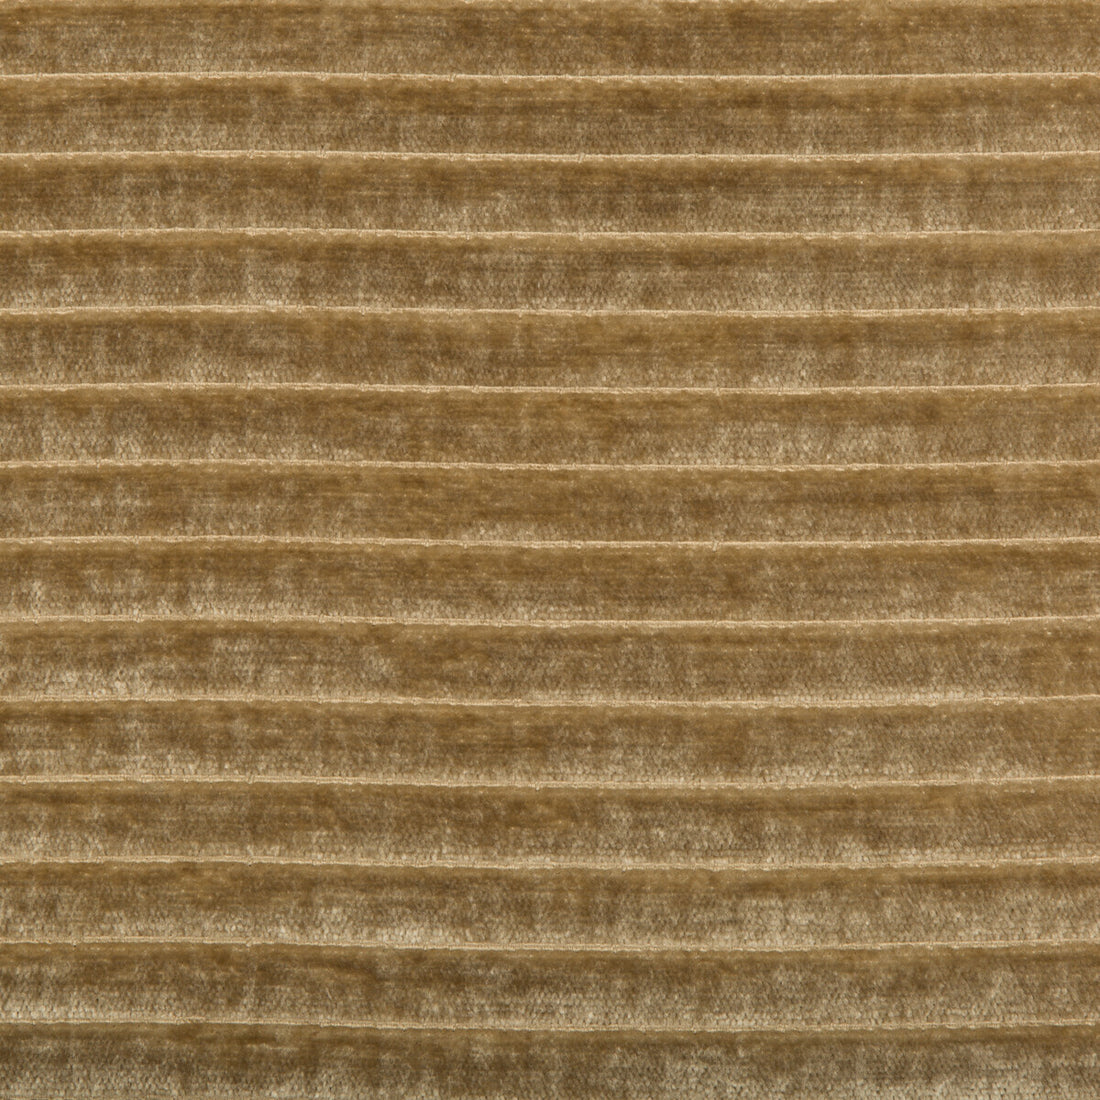 Kravet Smart fabric in 35780-16 color - pattern 35780.16.0 - by Kravet Smart in the Performance collection